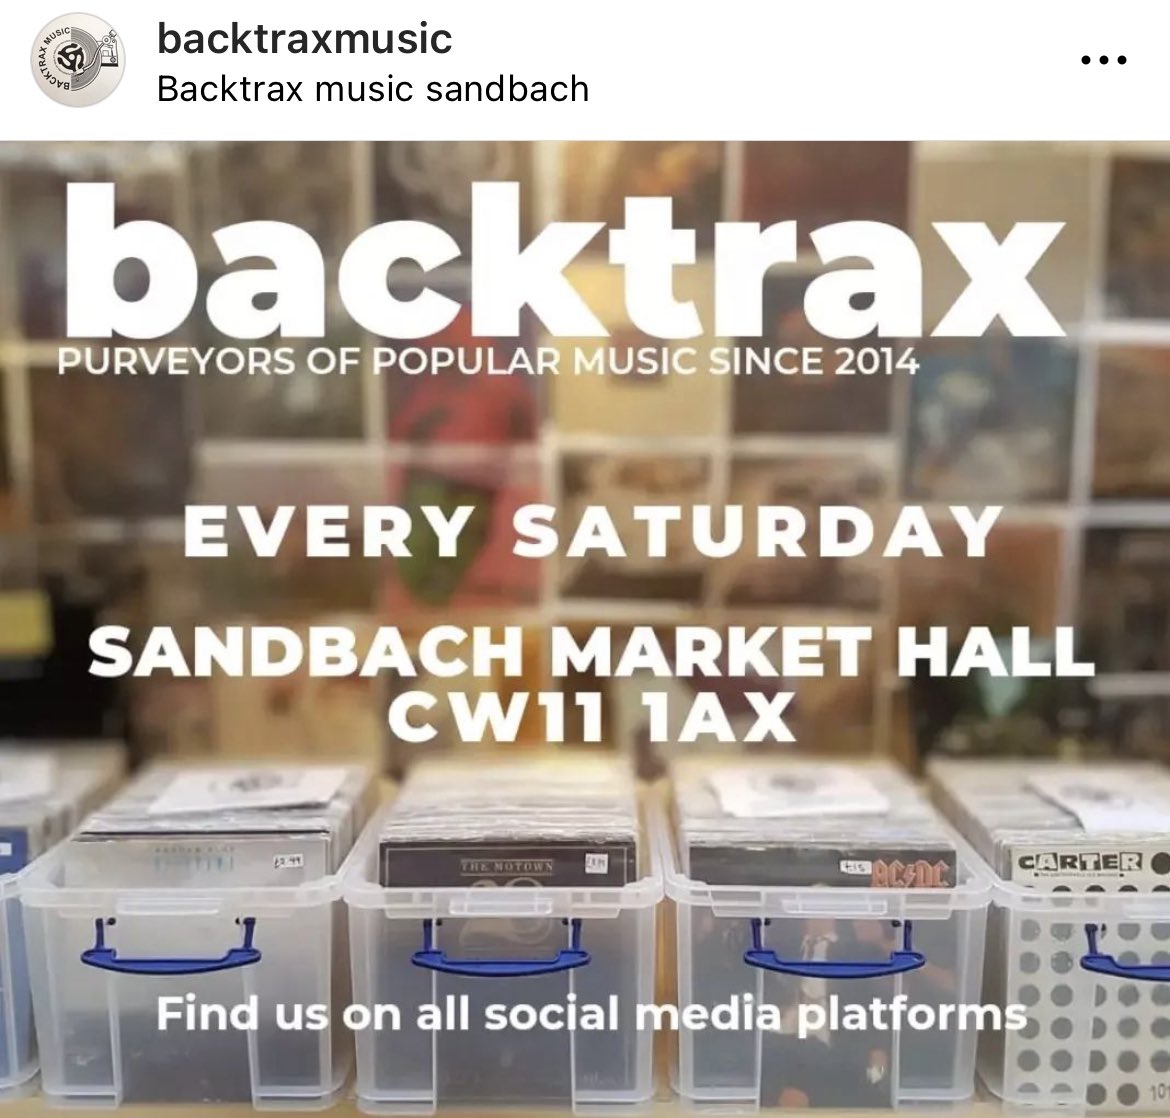 A huge thanks to the amazing @backtraxmusic for hooking me up with this awesome bag! Extremely generous & I’m very grateful!! Make sure you all head over to their bio, give them a follow & get over to the Market Hall in Sandbach to cop some quality music & a bag! #backtraxmusic